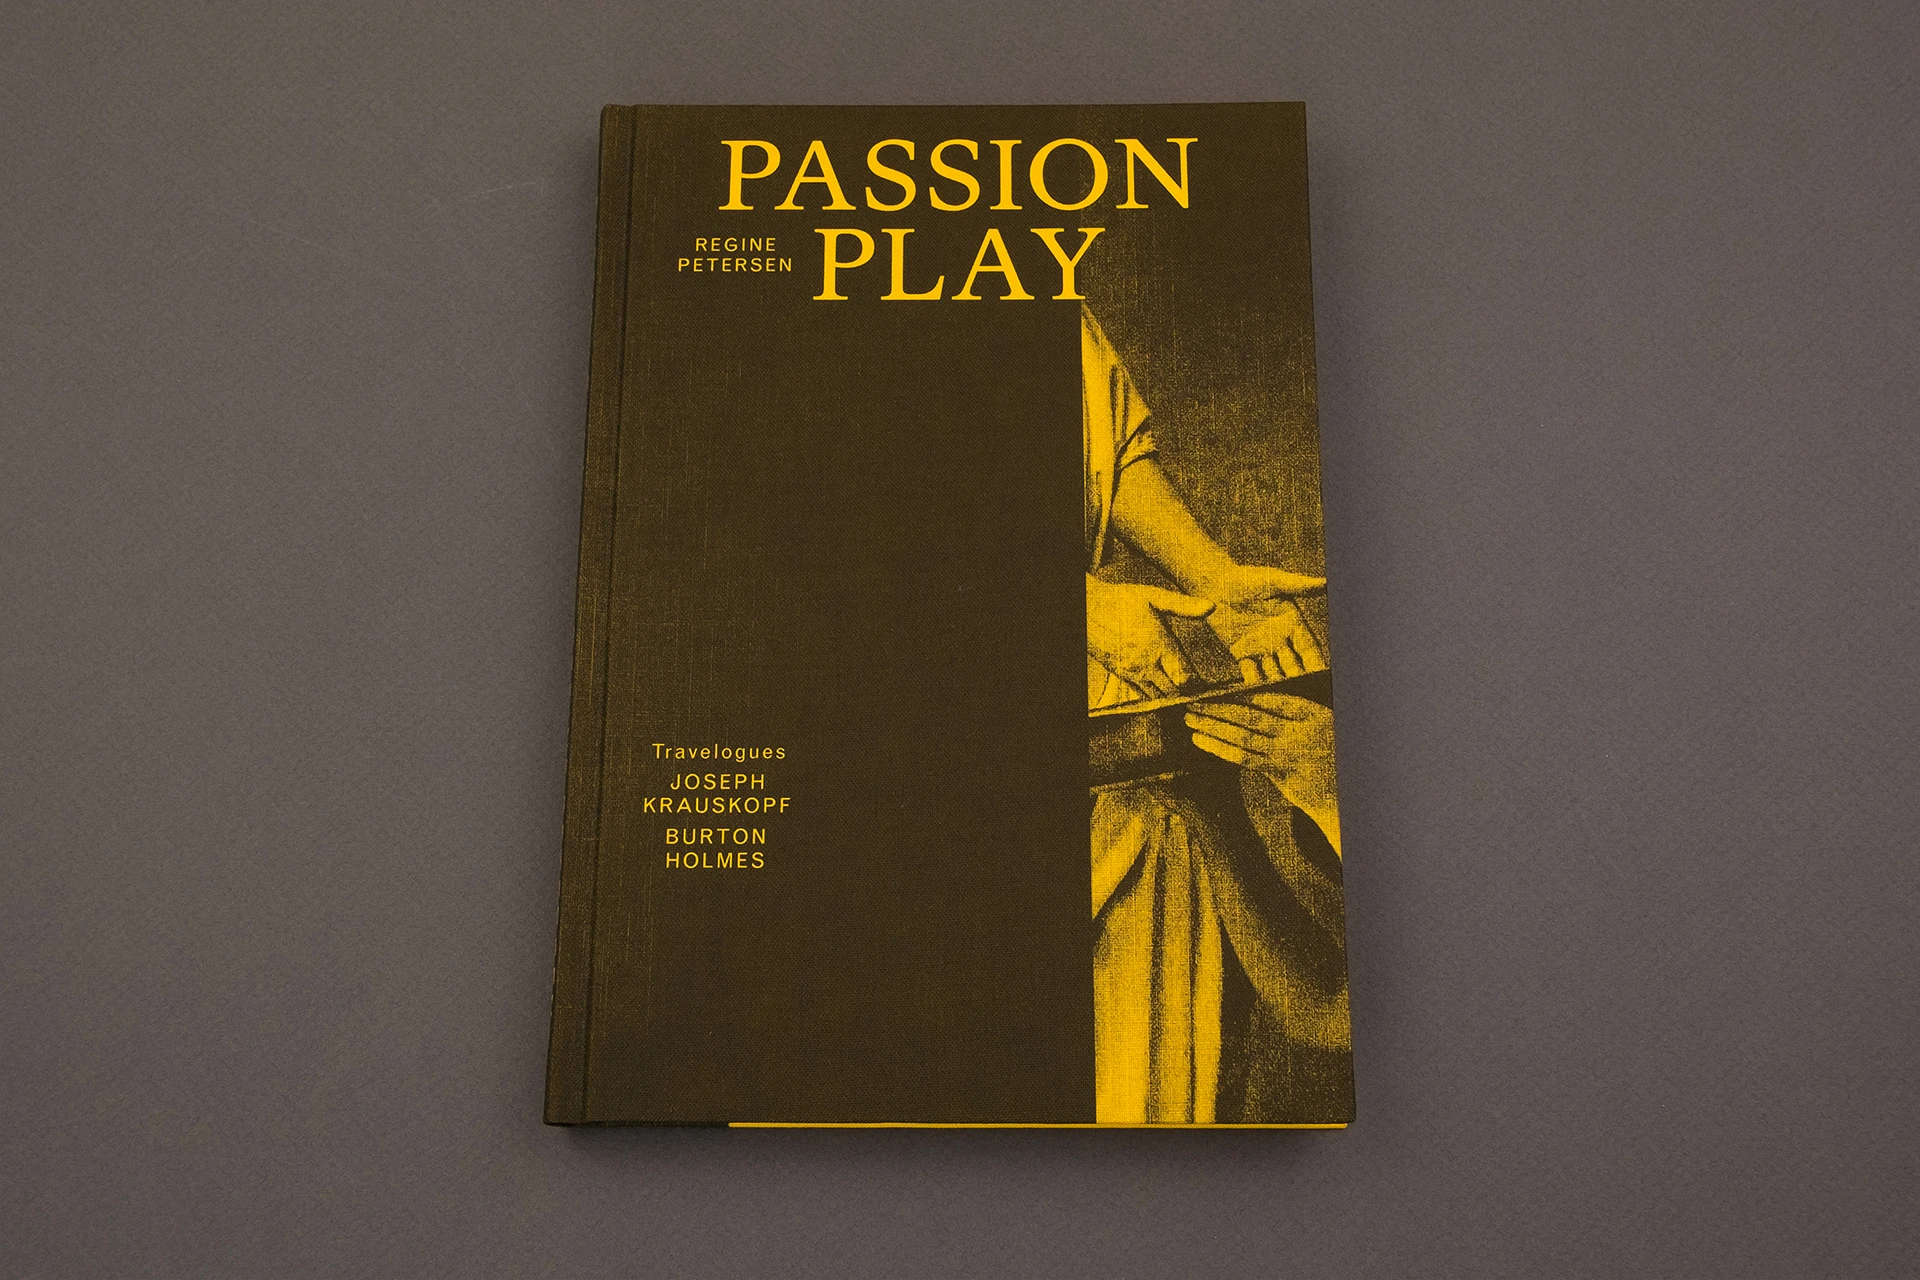 Passion Play - The Eriskay Connection